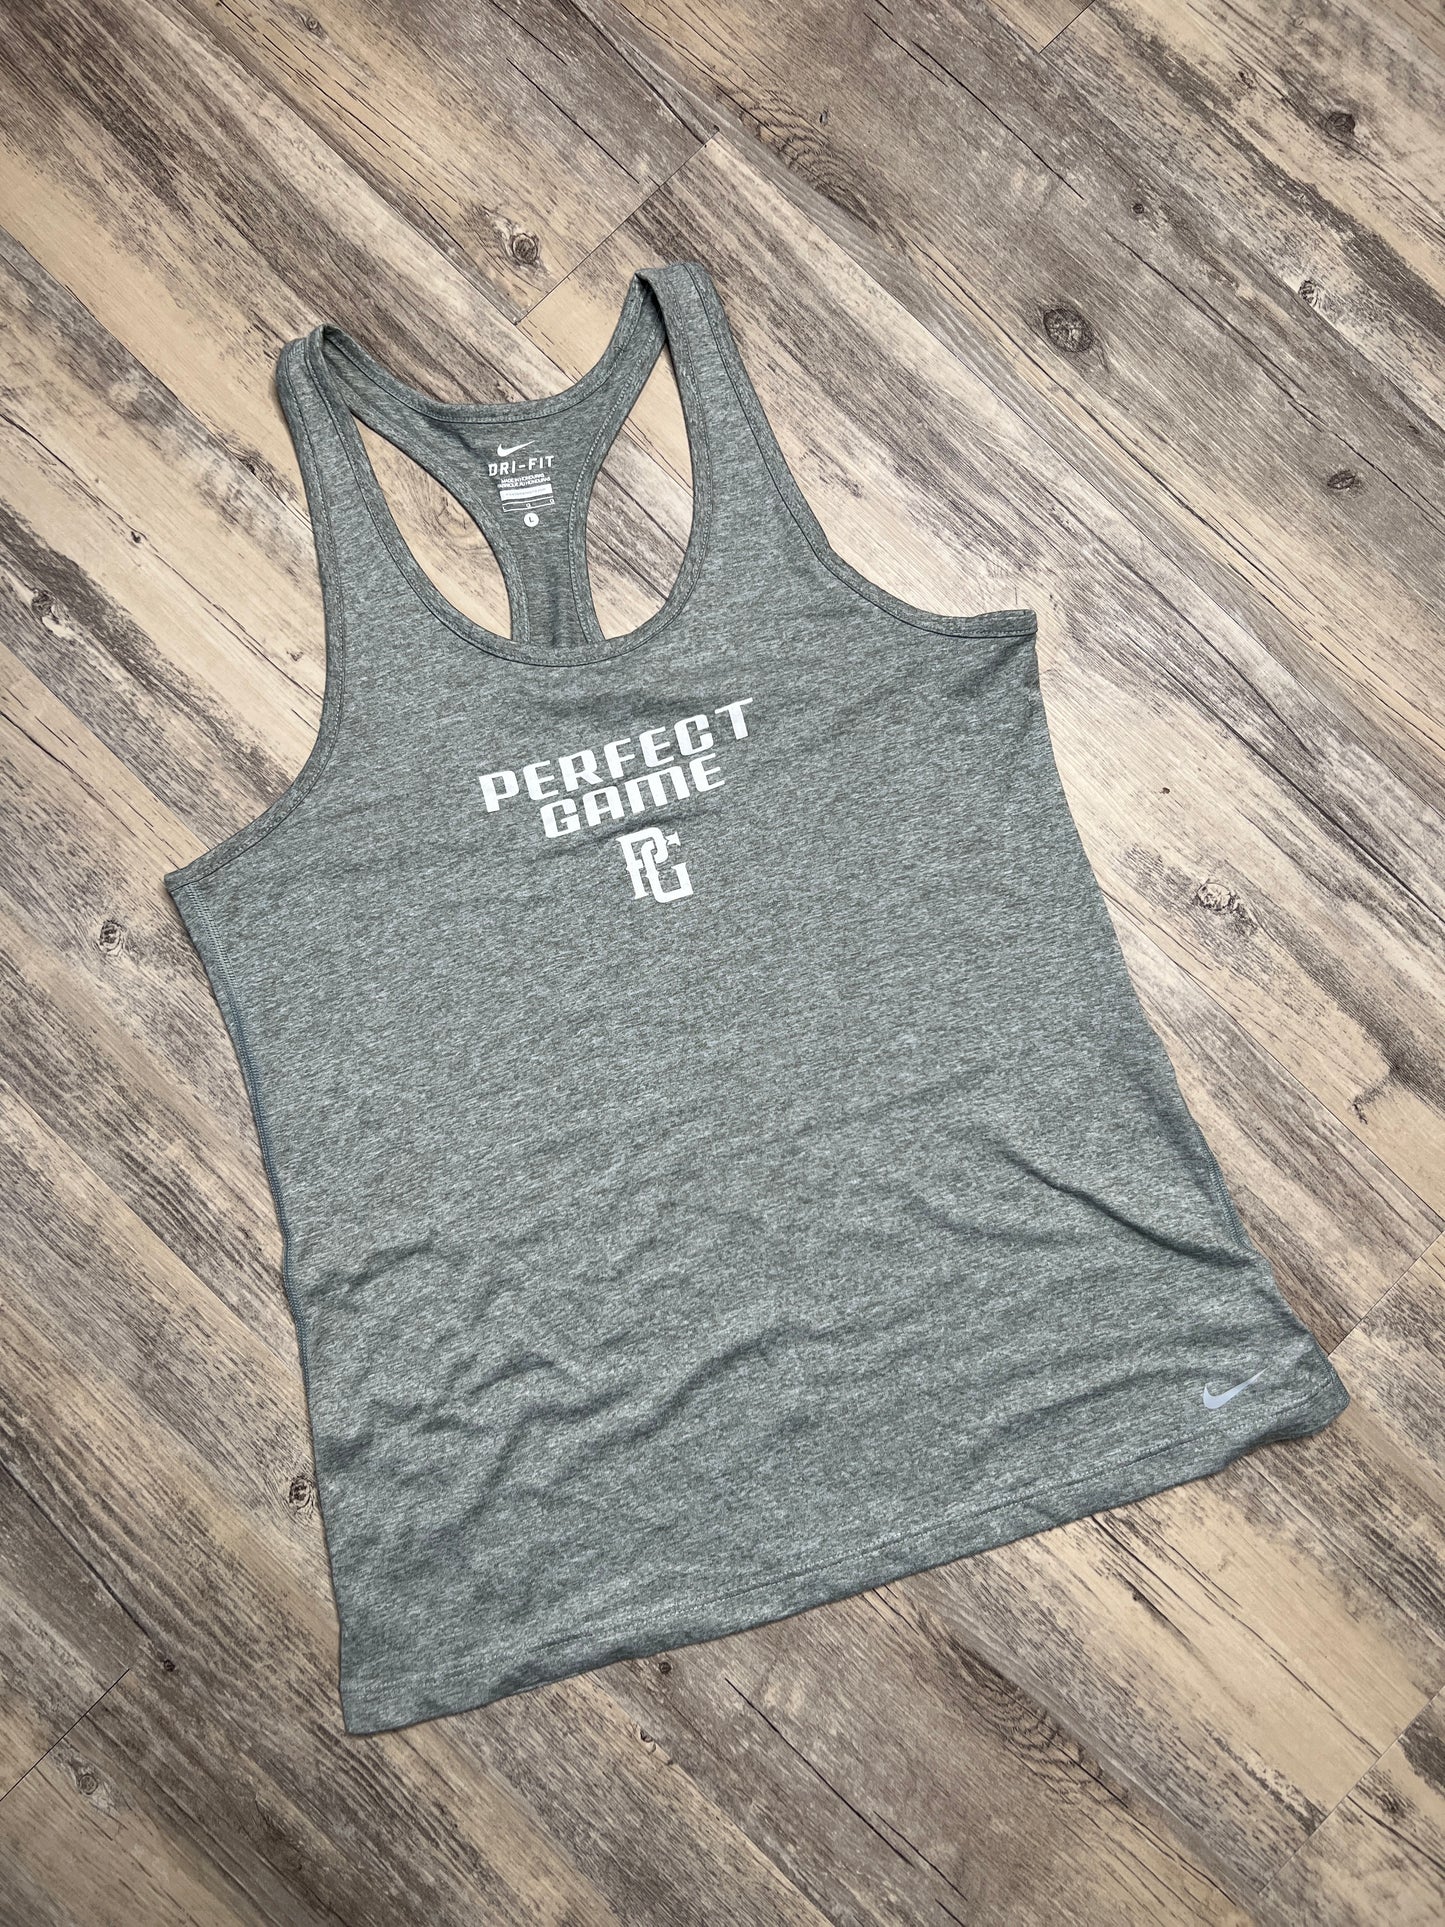 "Perfect Game" Racer Tank - L